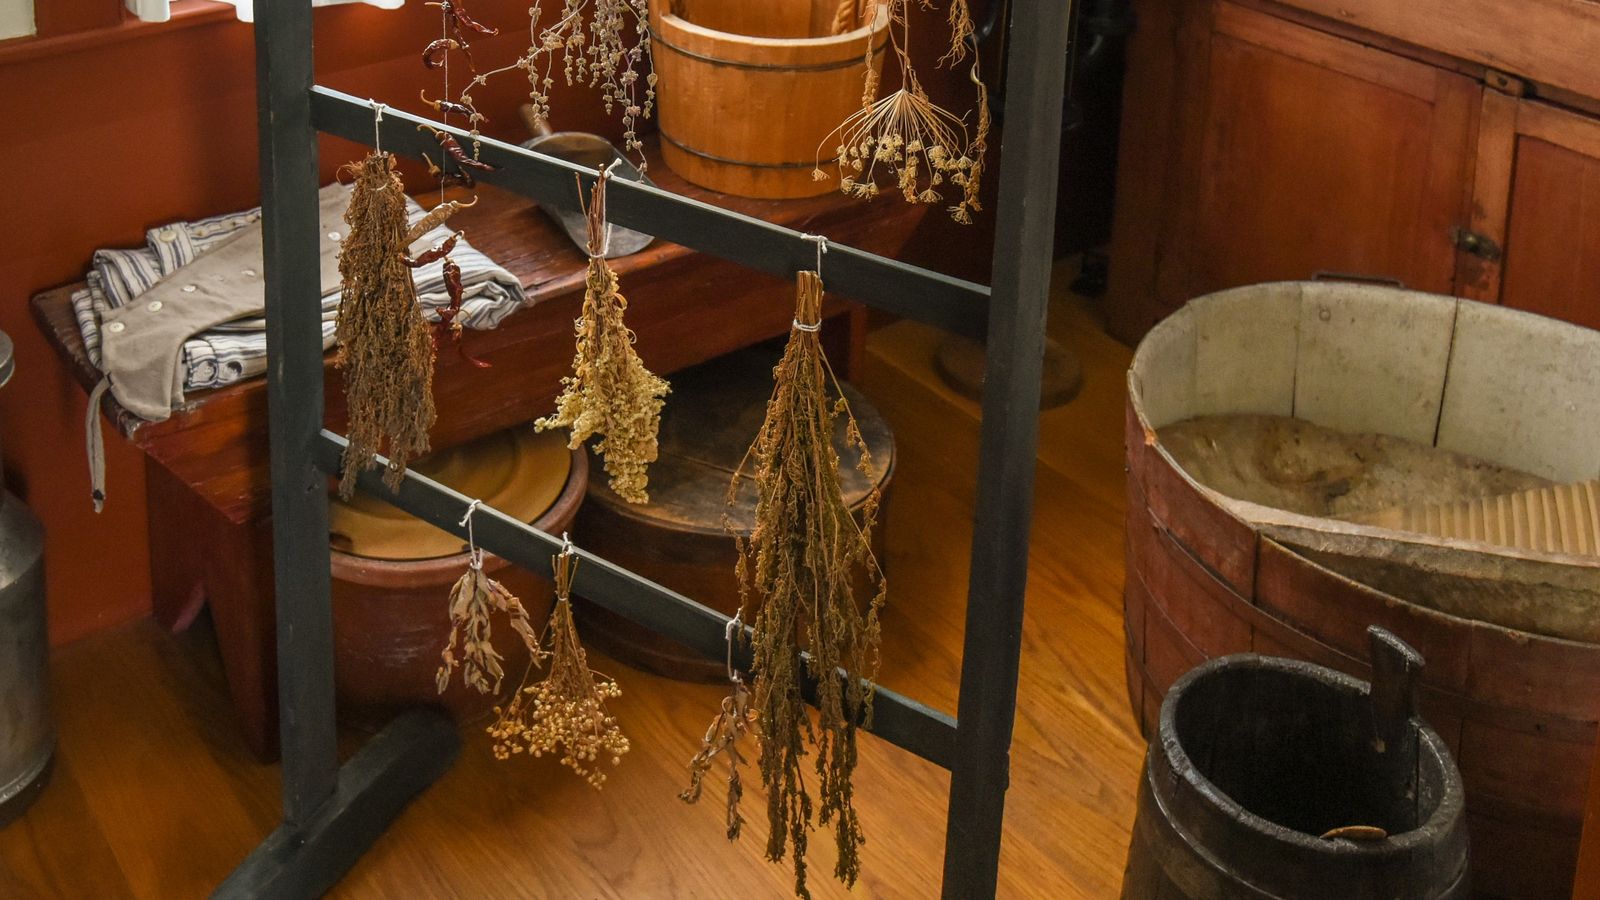 Herbs drying on a rack in the Historic John Johnson home in Hyrum, Ohio.